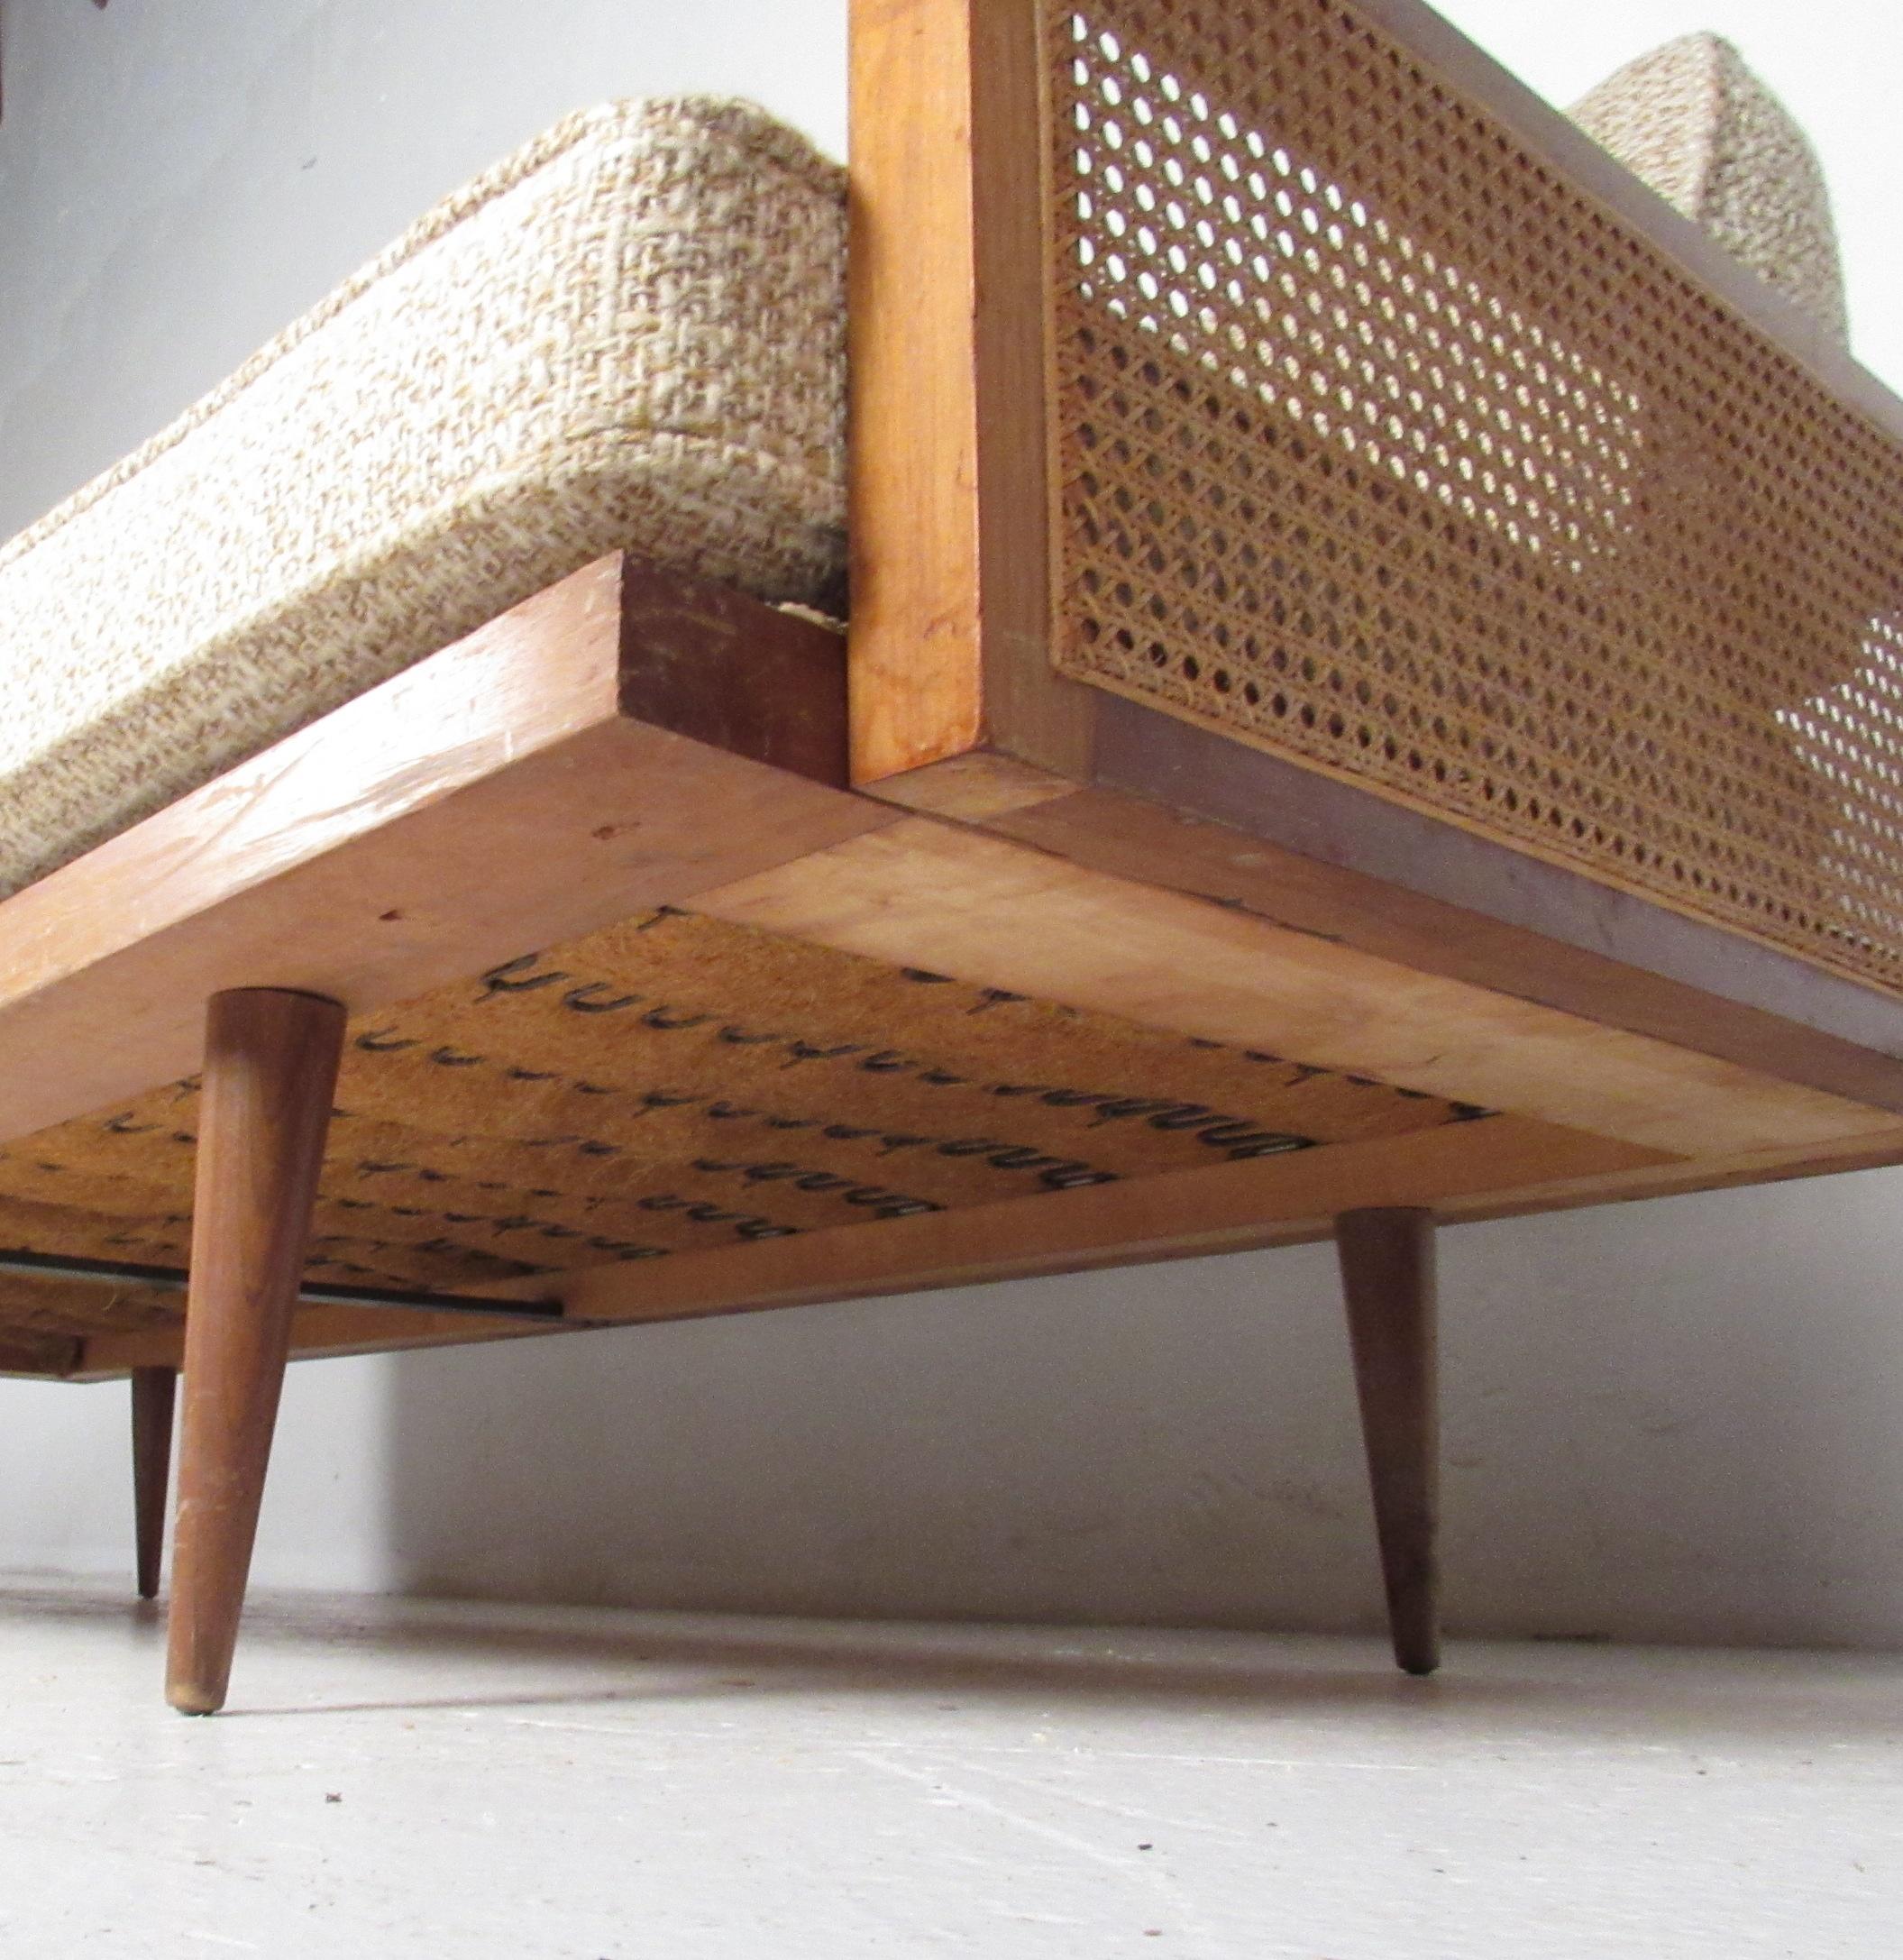 American Midcentury Walnut and Cane Sofa or Daybed